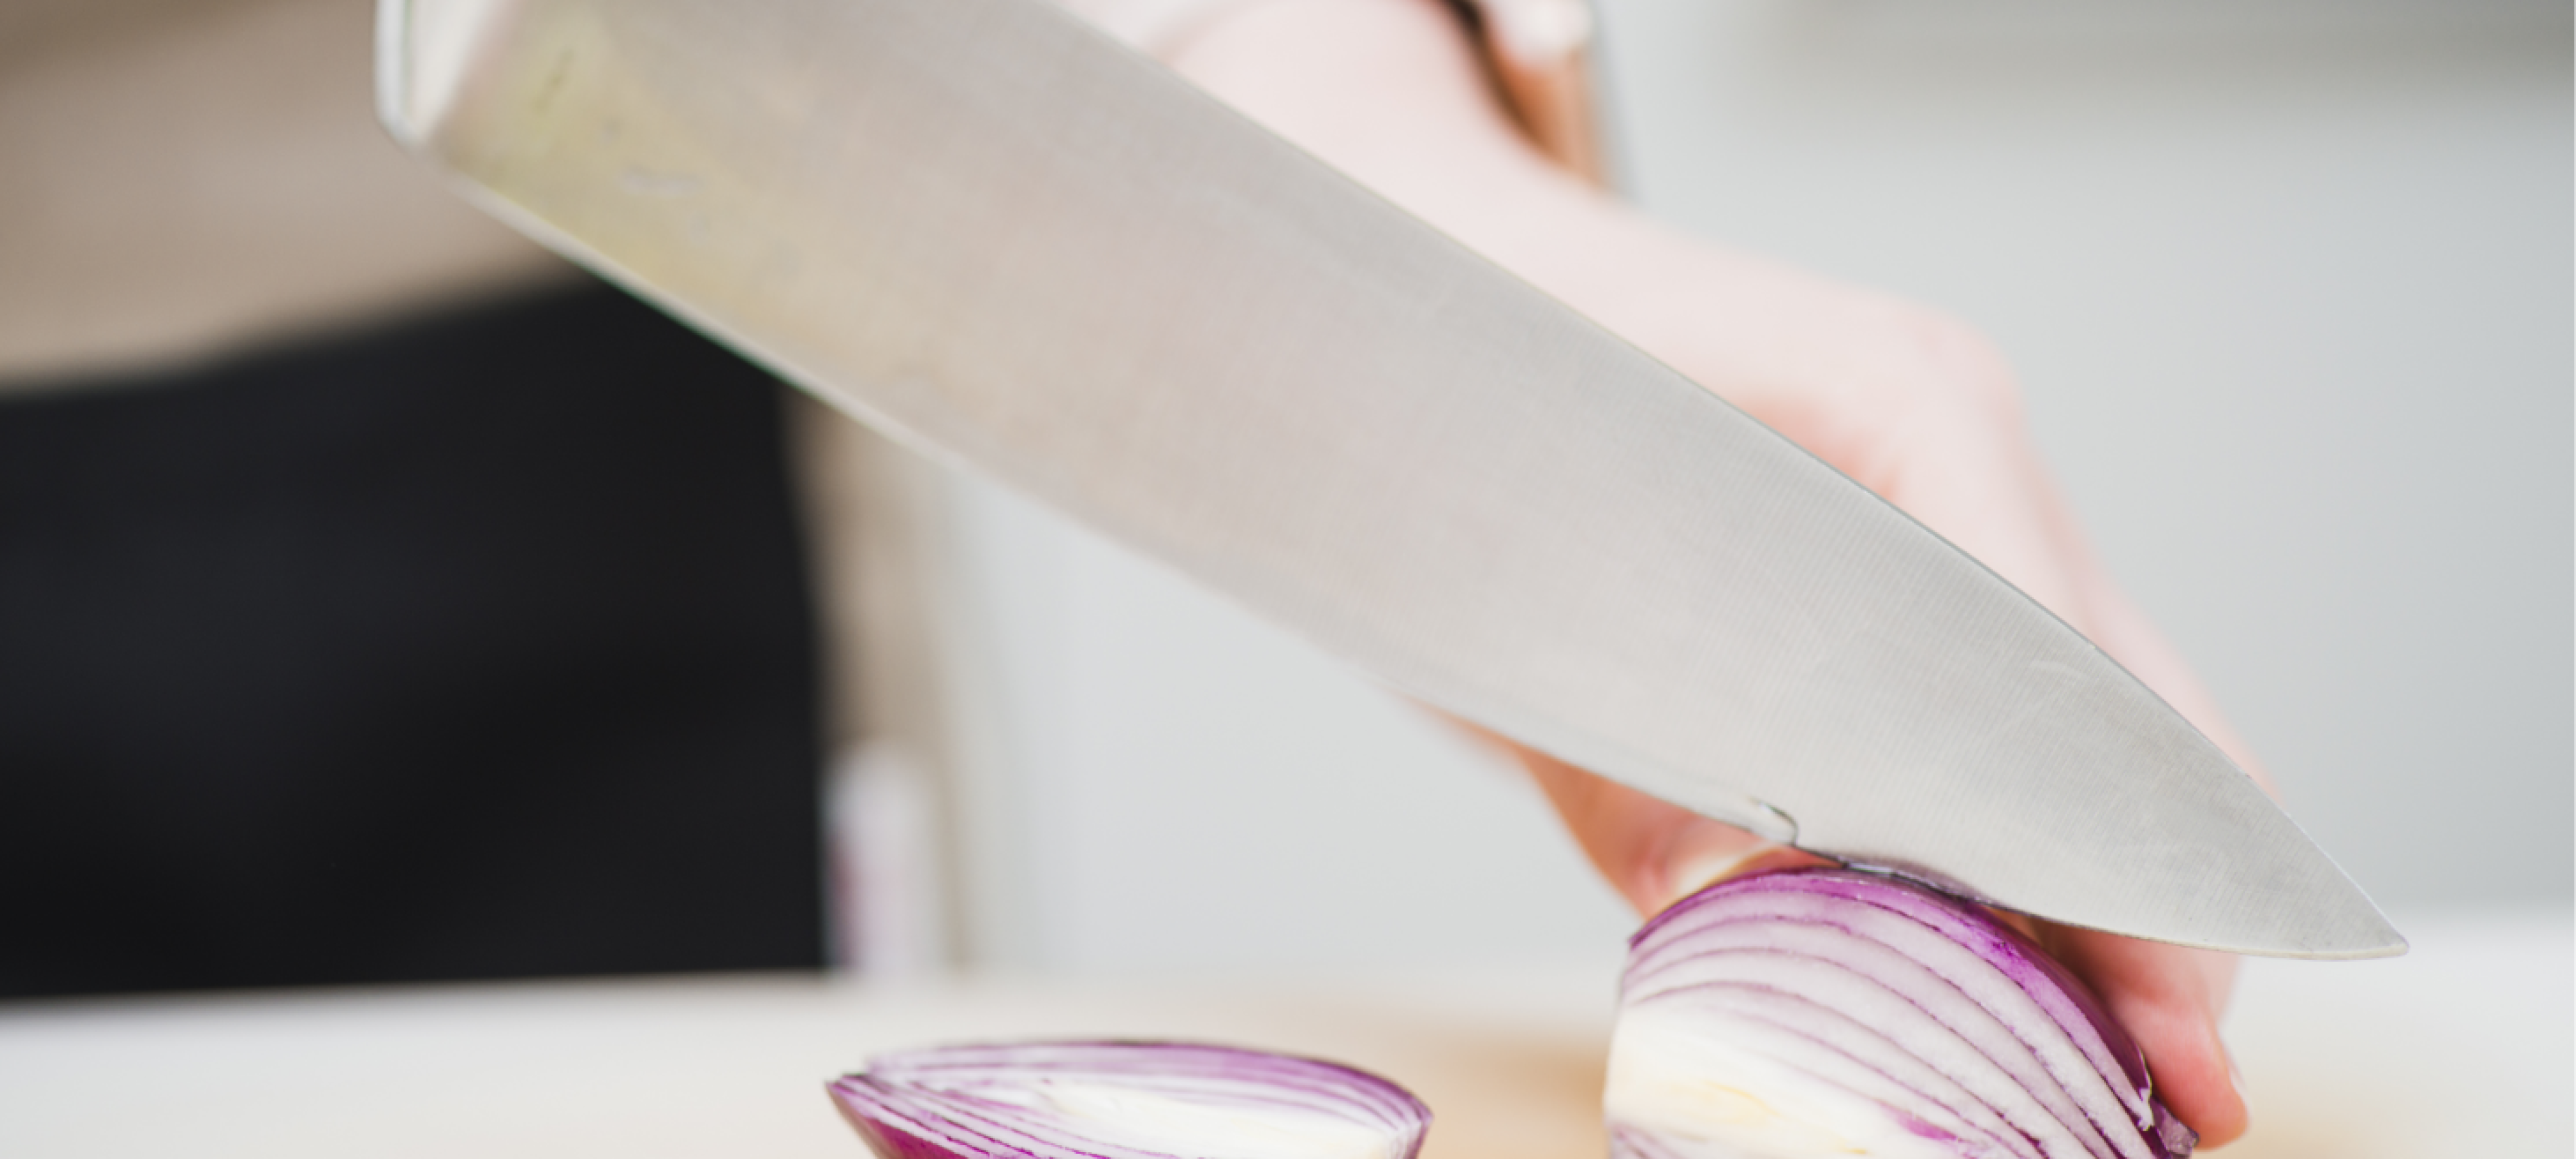 7 Essential Chef Knives to Cut & Dice Onions